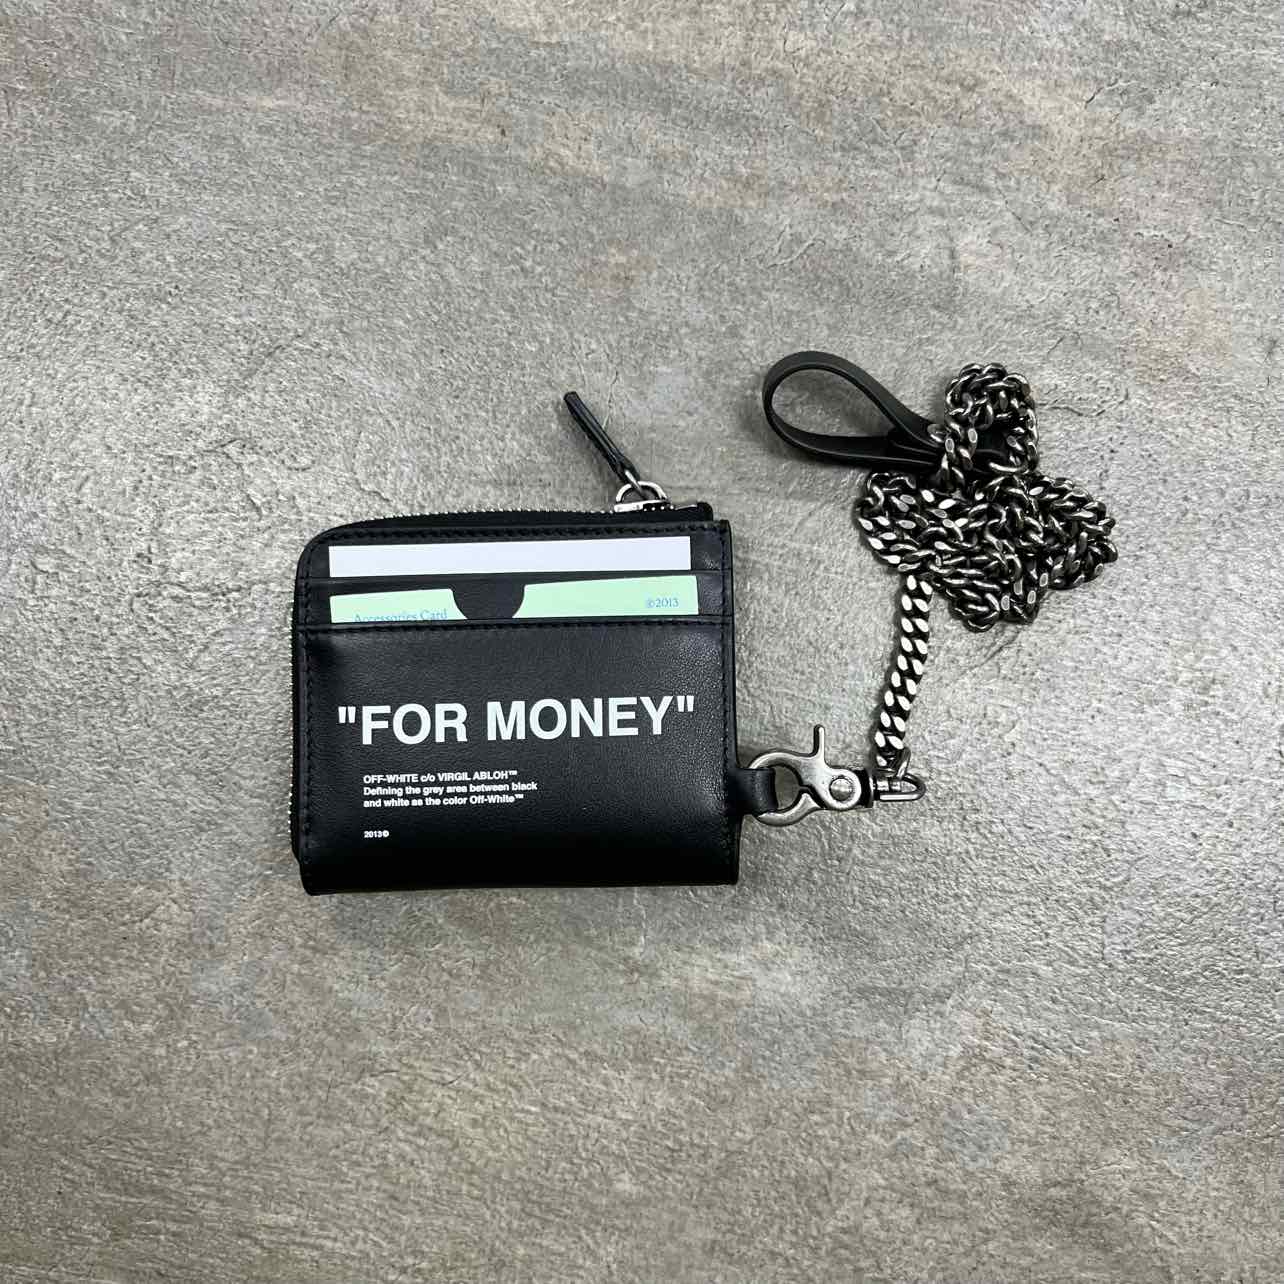 OFF-WHITE Chain Wallet "FOR MONEY" New Black